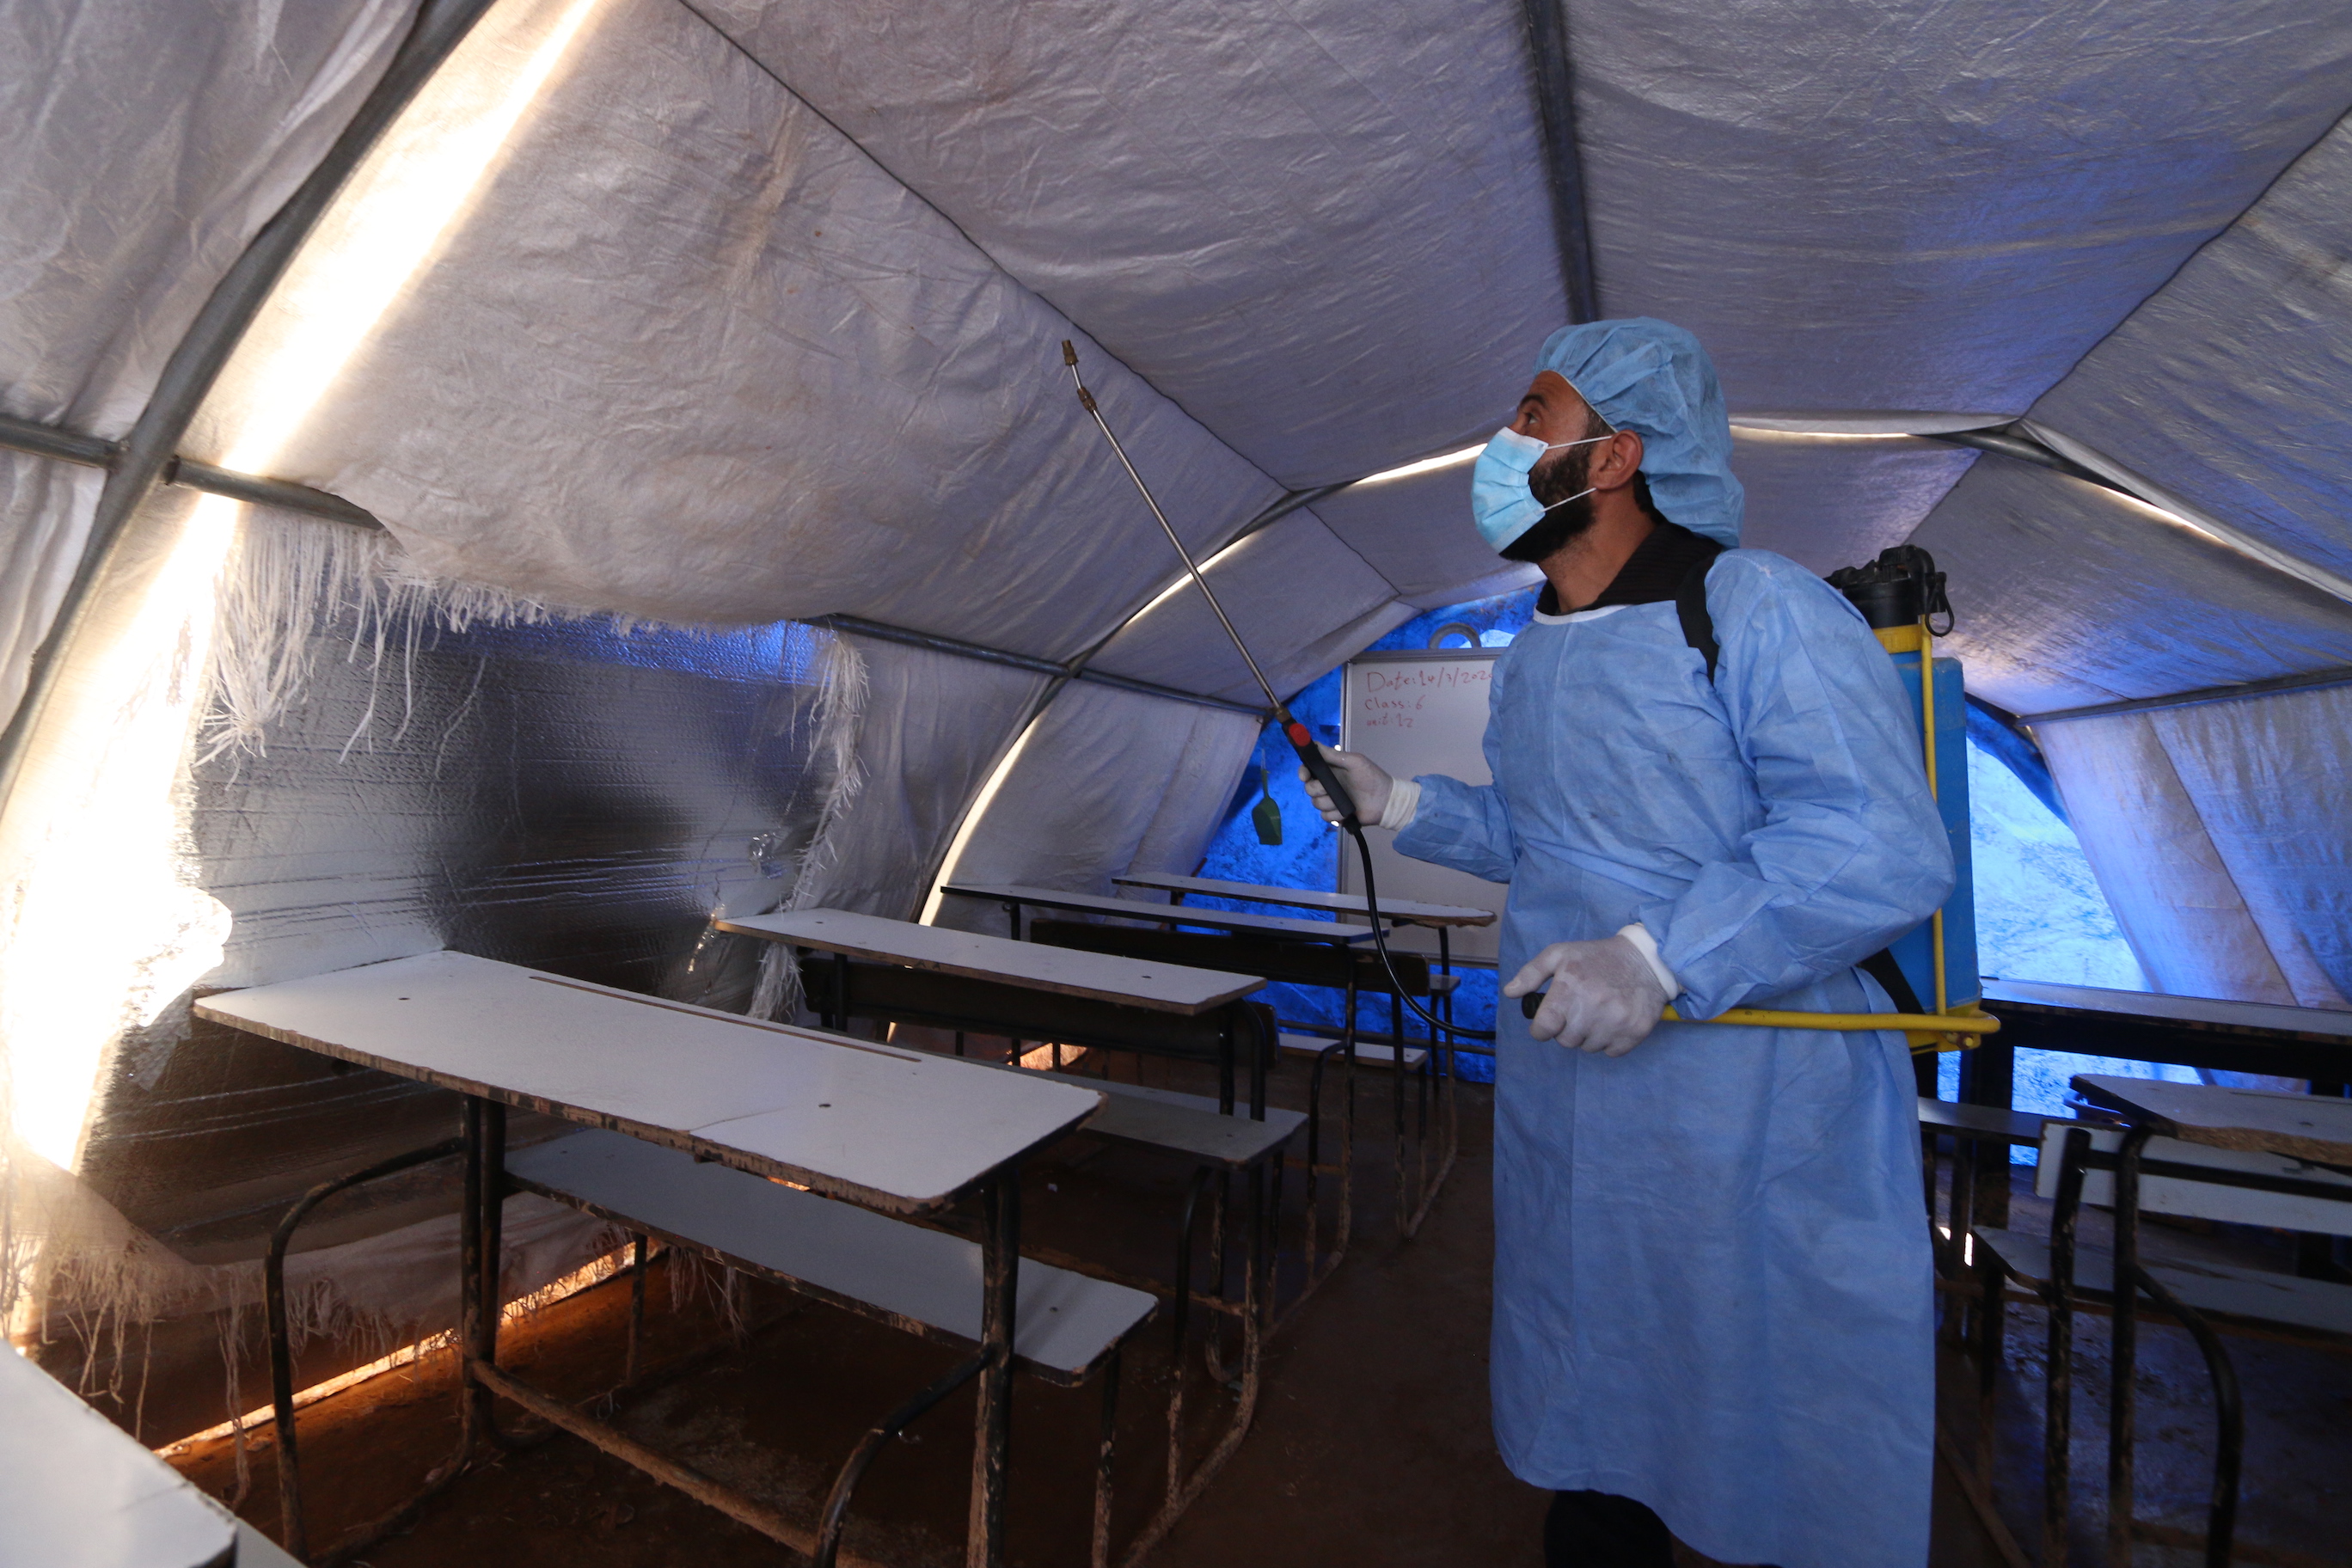 Aid workers in the Atmeh refugee camp sprayed disinfectant solution on surfaces to prevent spread of covid-19 (MEE/Yousef Gharib)